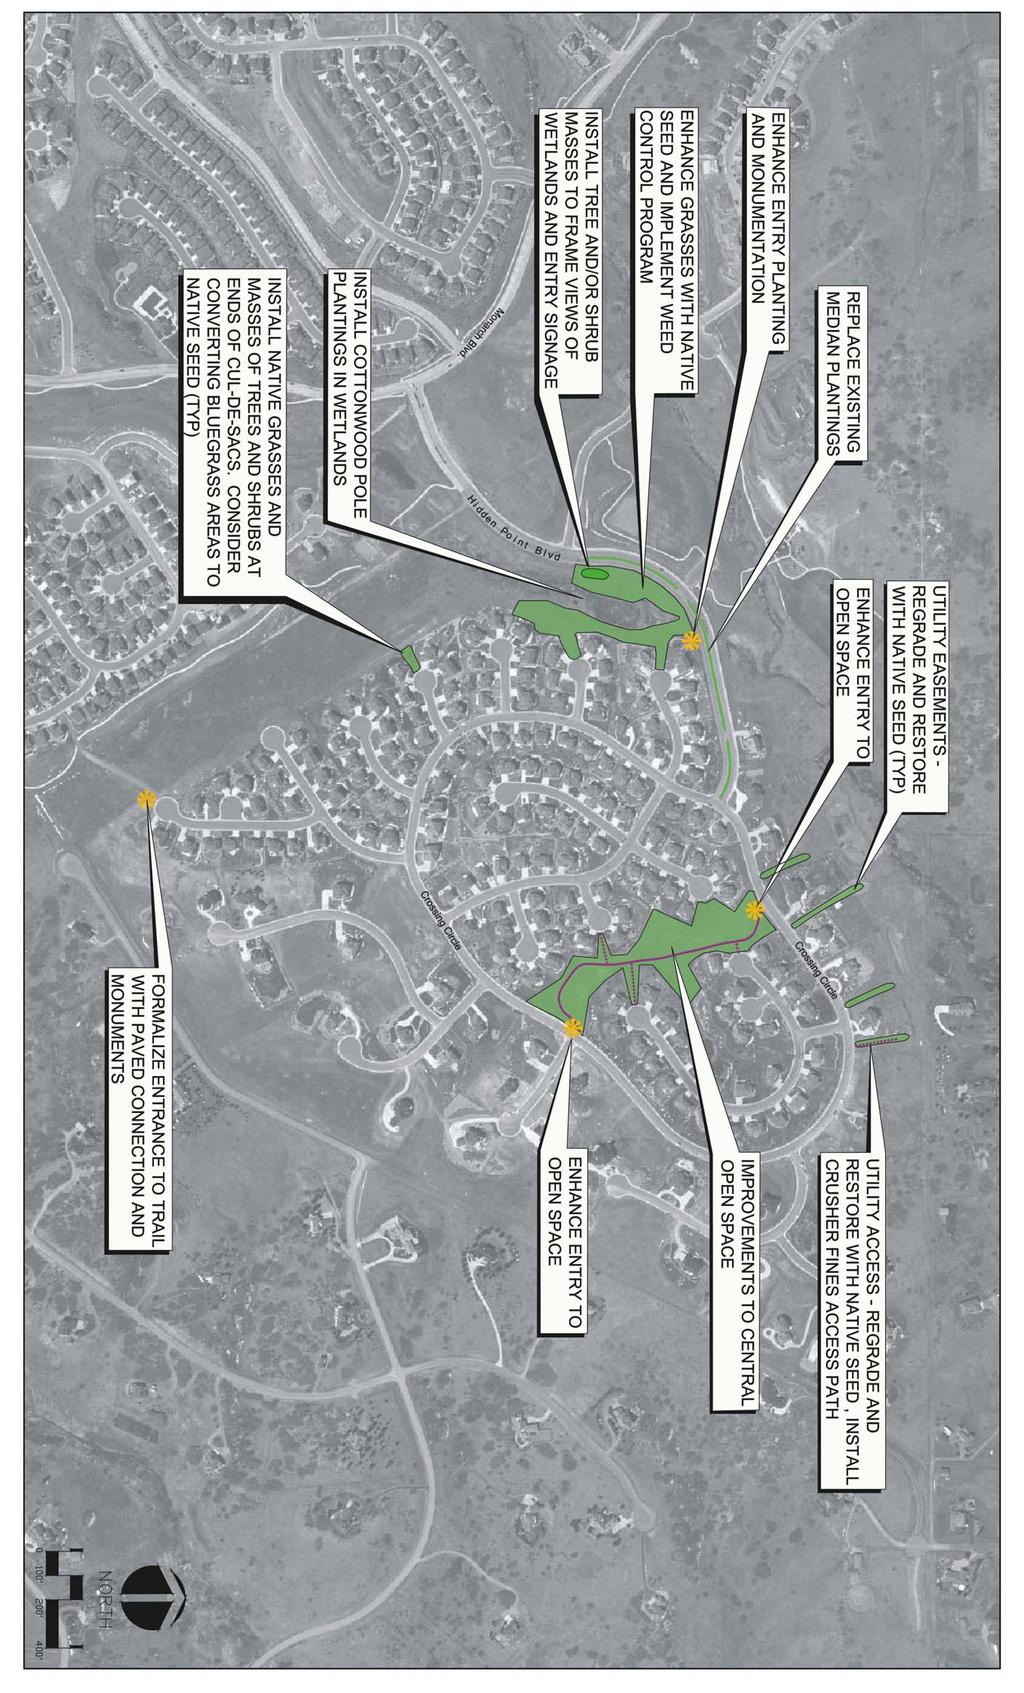 6 Master Plan Recommendations This plan shows the community wide vision for future landscape improvements in the